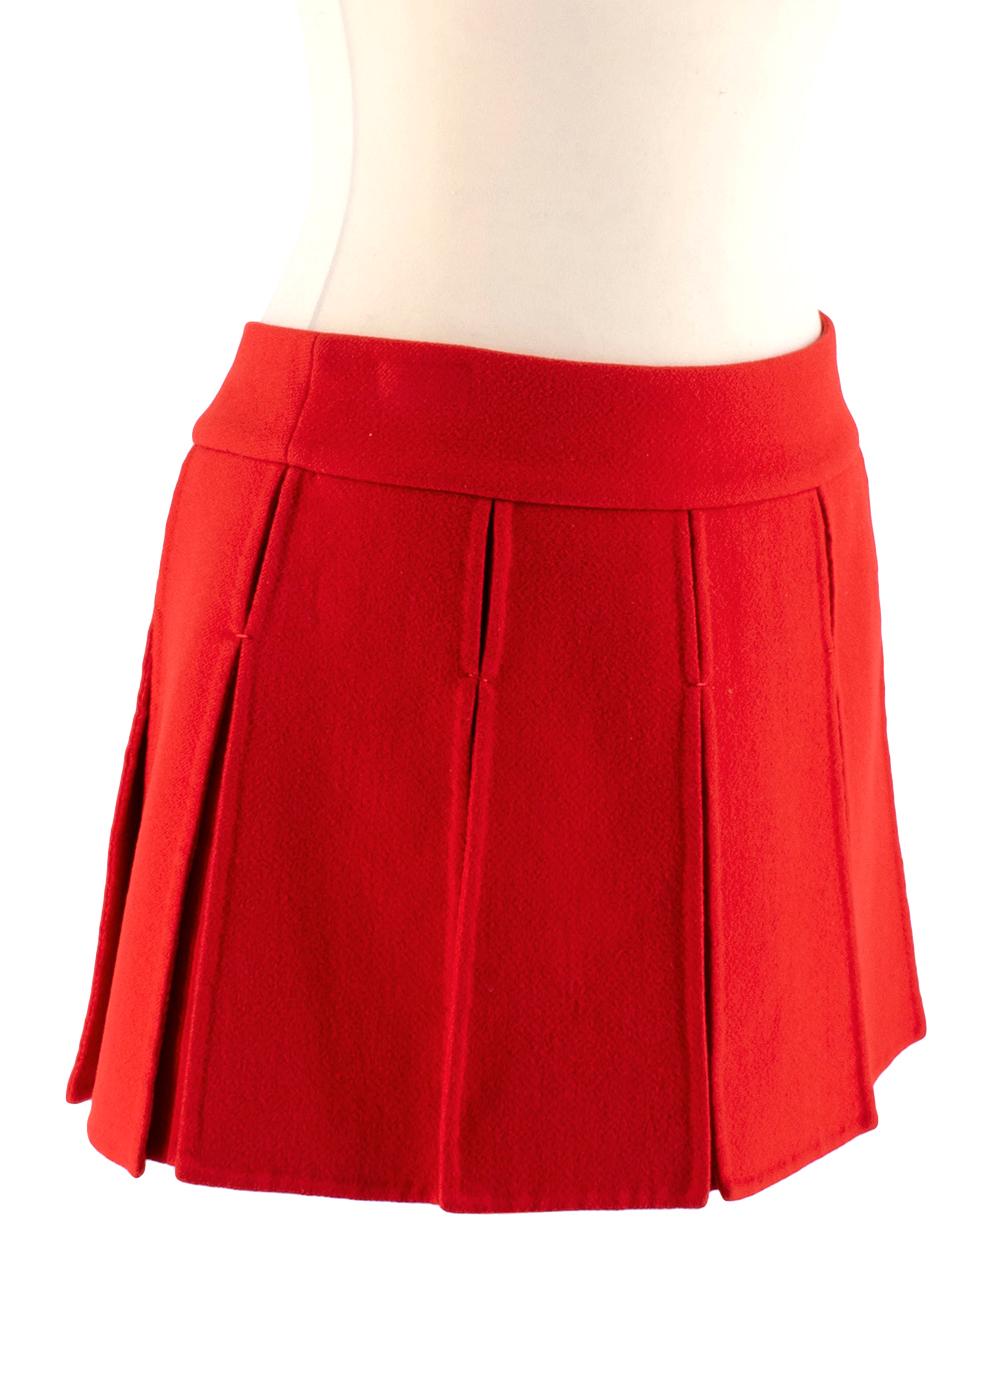 Louis Vuitton Red Paneled Cashmere Mini Skirt 

-Luxurious soft cashmere texture 
-Rich red hue 
-Paneled outer layer  for movement 
-Completely lined 
-Branded Invisible zip to the side 

Materials:
100% cashmere

Dry clean only 

Made in Italy 